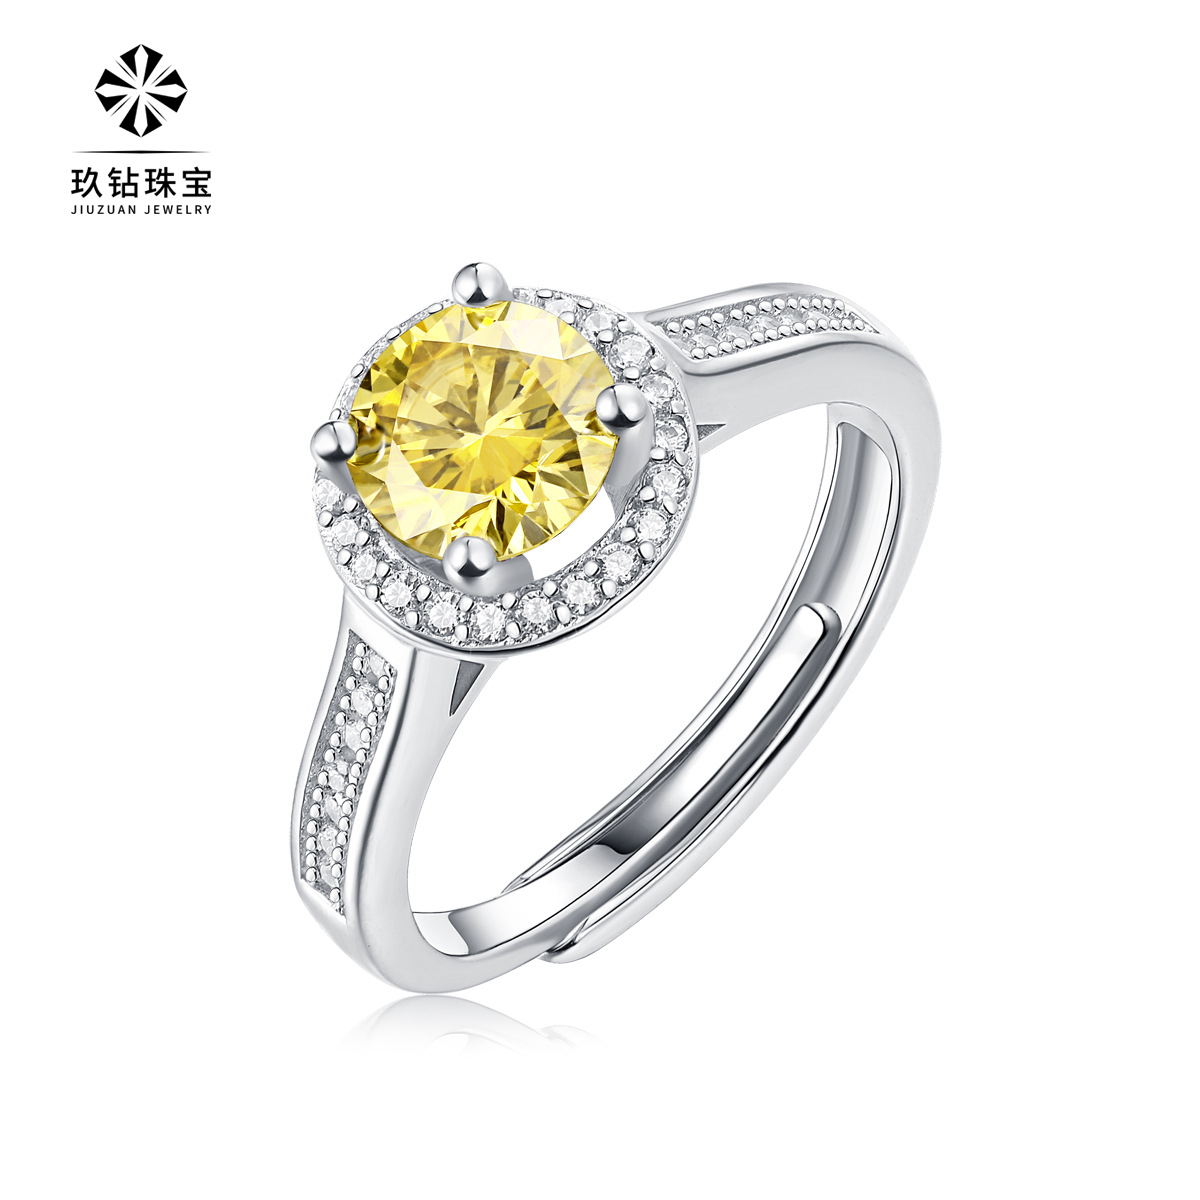 Silver S925 Women's Yellow Moissanite Ring Hao Inlaid Round Bag Ring Live Mouth Adjustable Spot Delivery